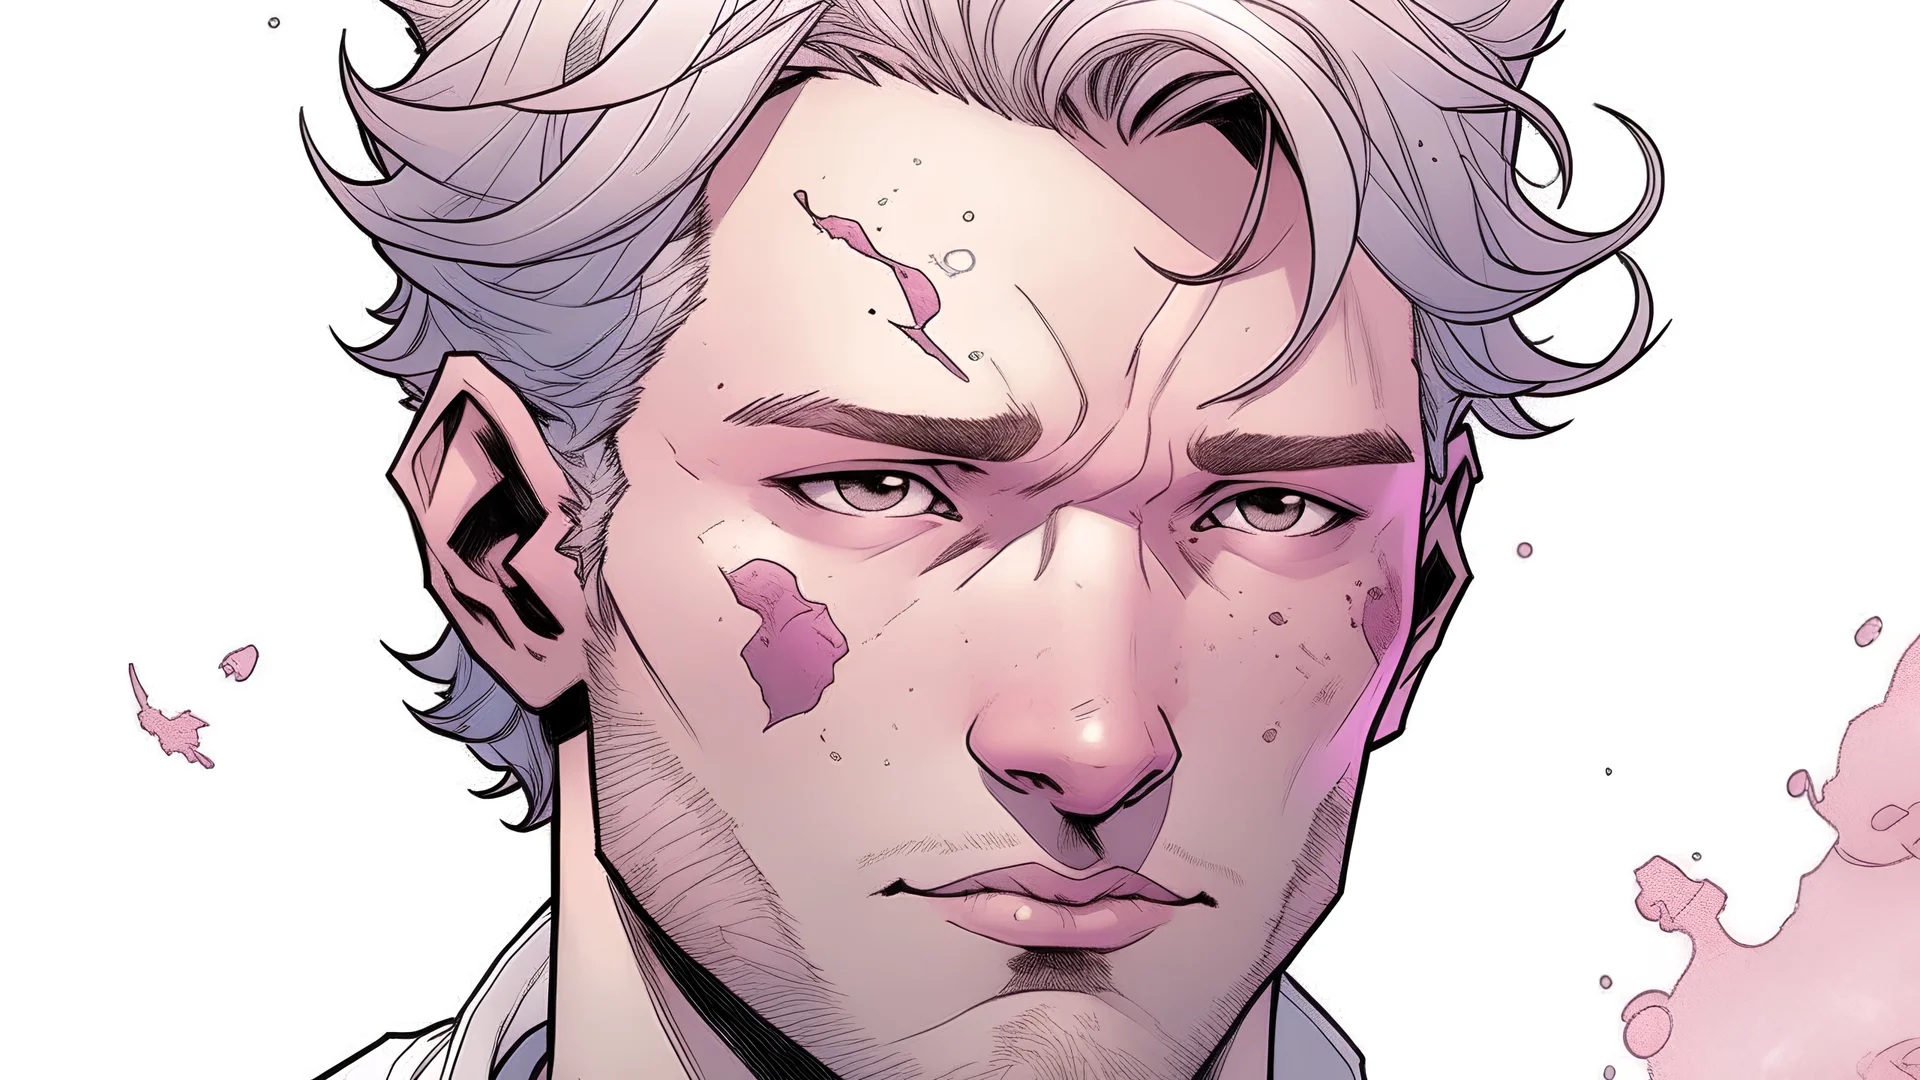 Heath was born with a porcelain face, snowfall hair that was alike his parents, his sun kissed warm skin. His left eye was a lavender color while his right was a soft pink. Marvelverse comic marvelverse characters